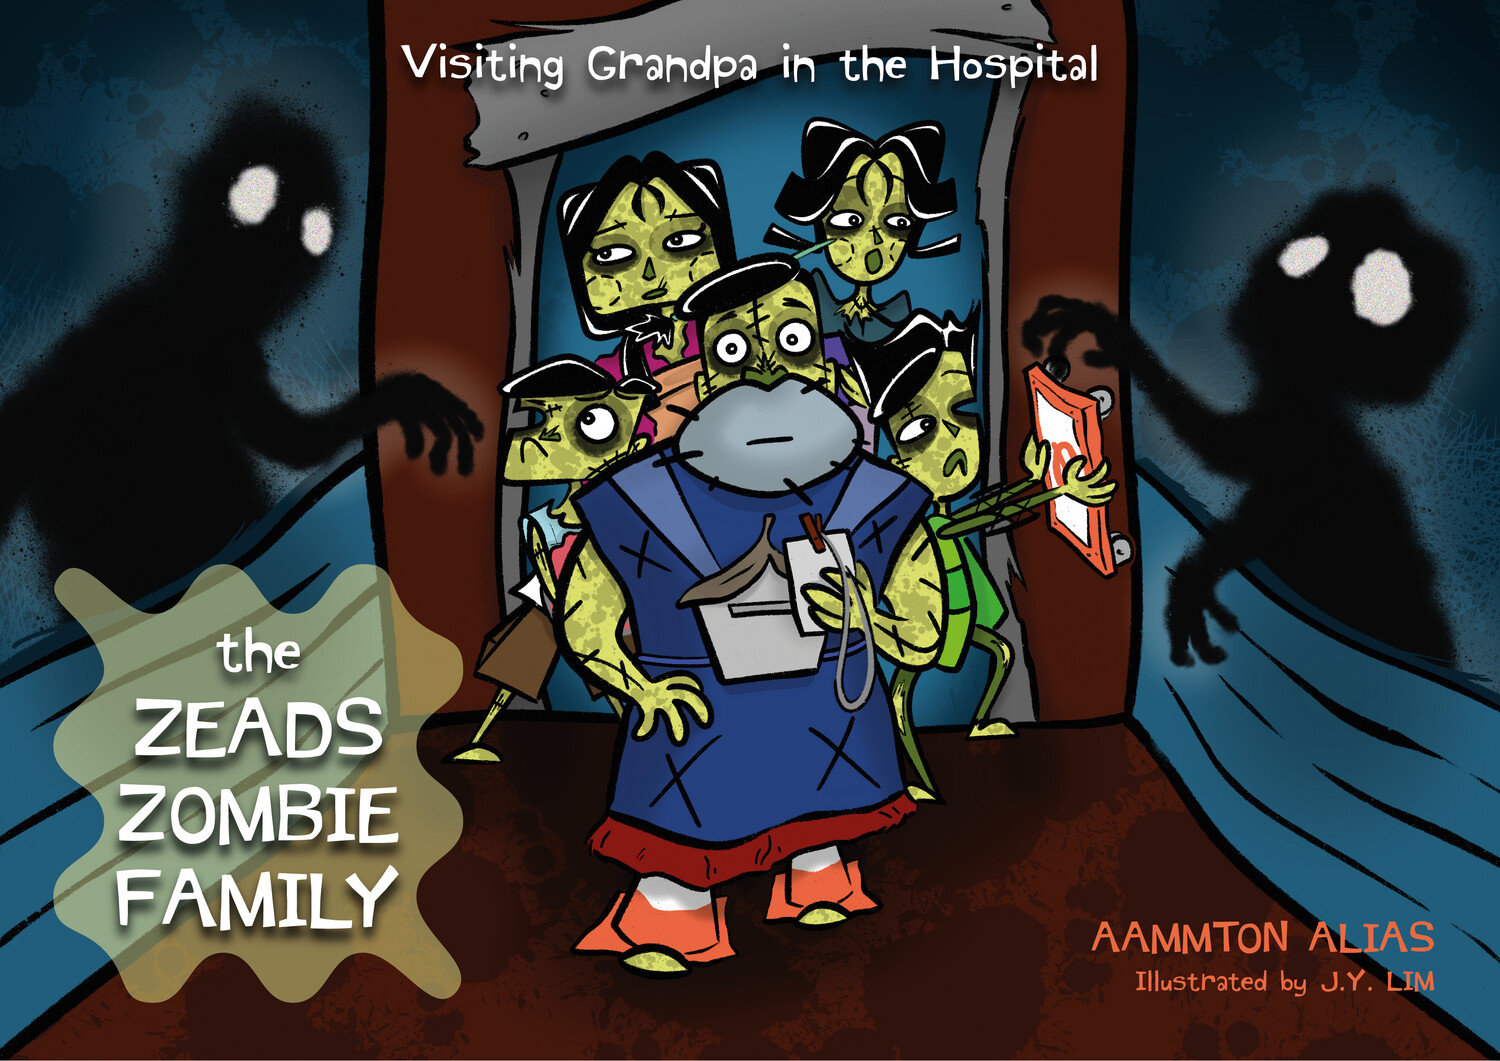 The Zeads Zombie Family: Visiting Grandpa In The Hospital